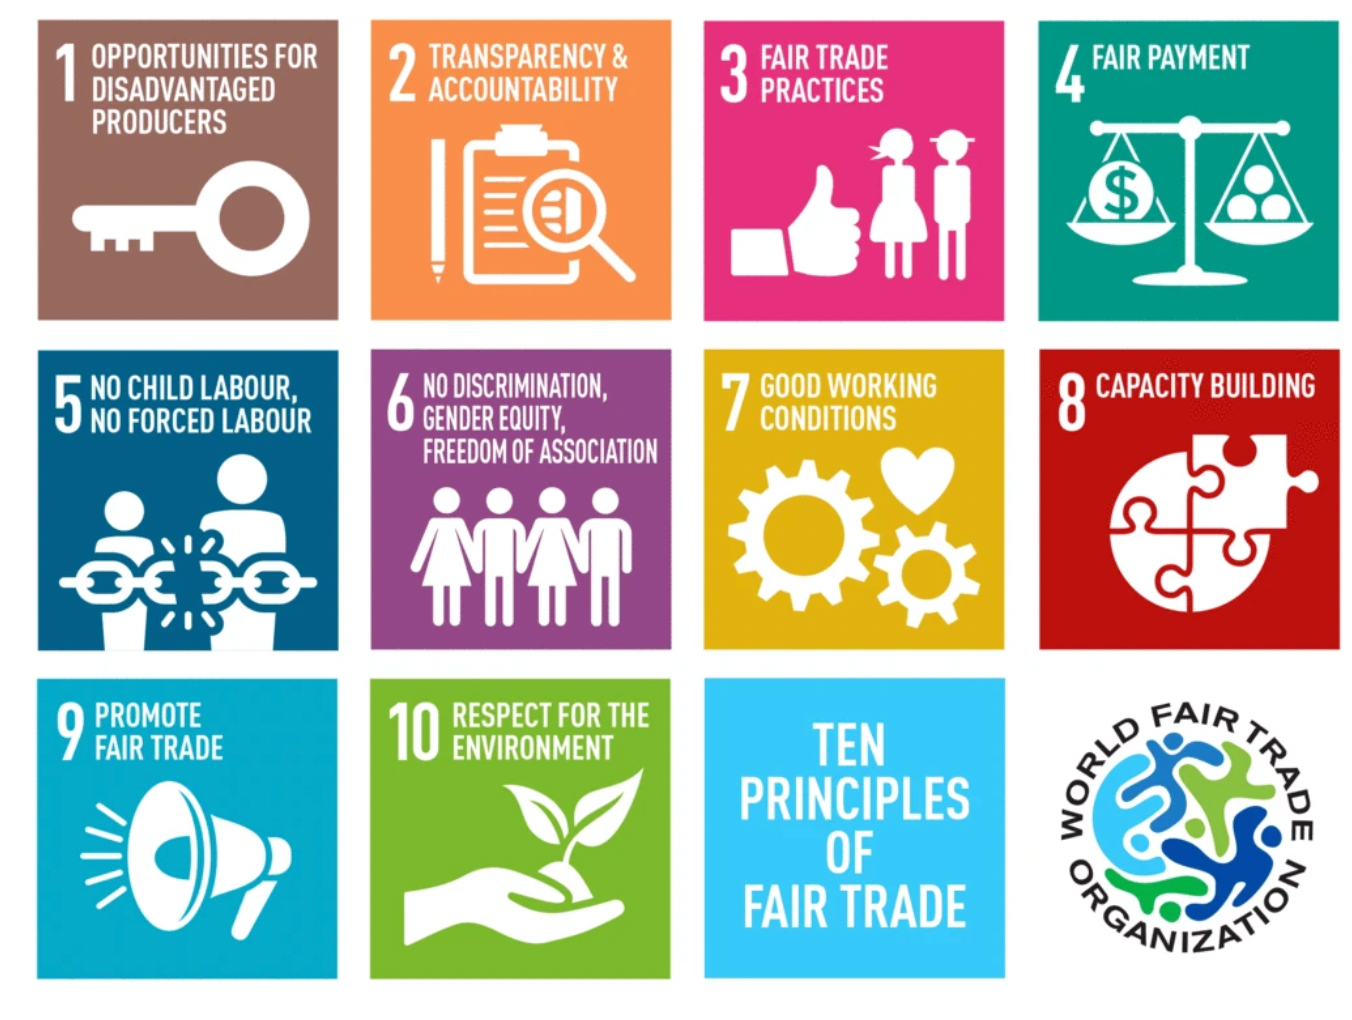 10 Principles of Fair Trade from WFTO